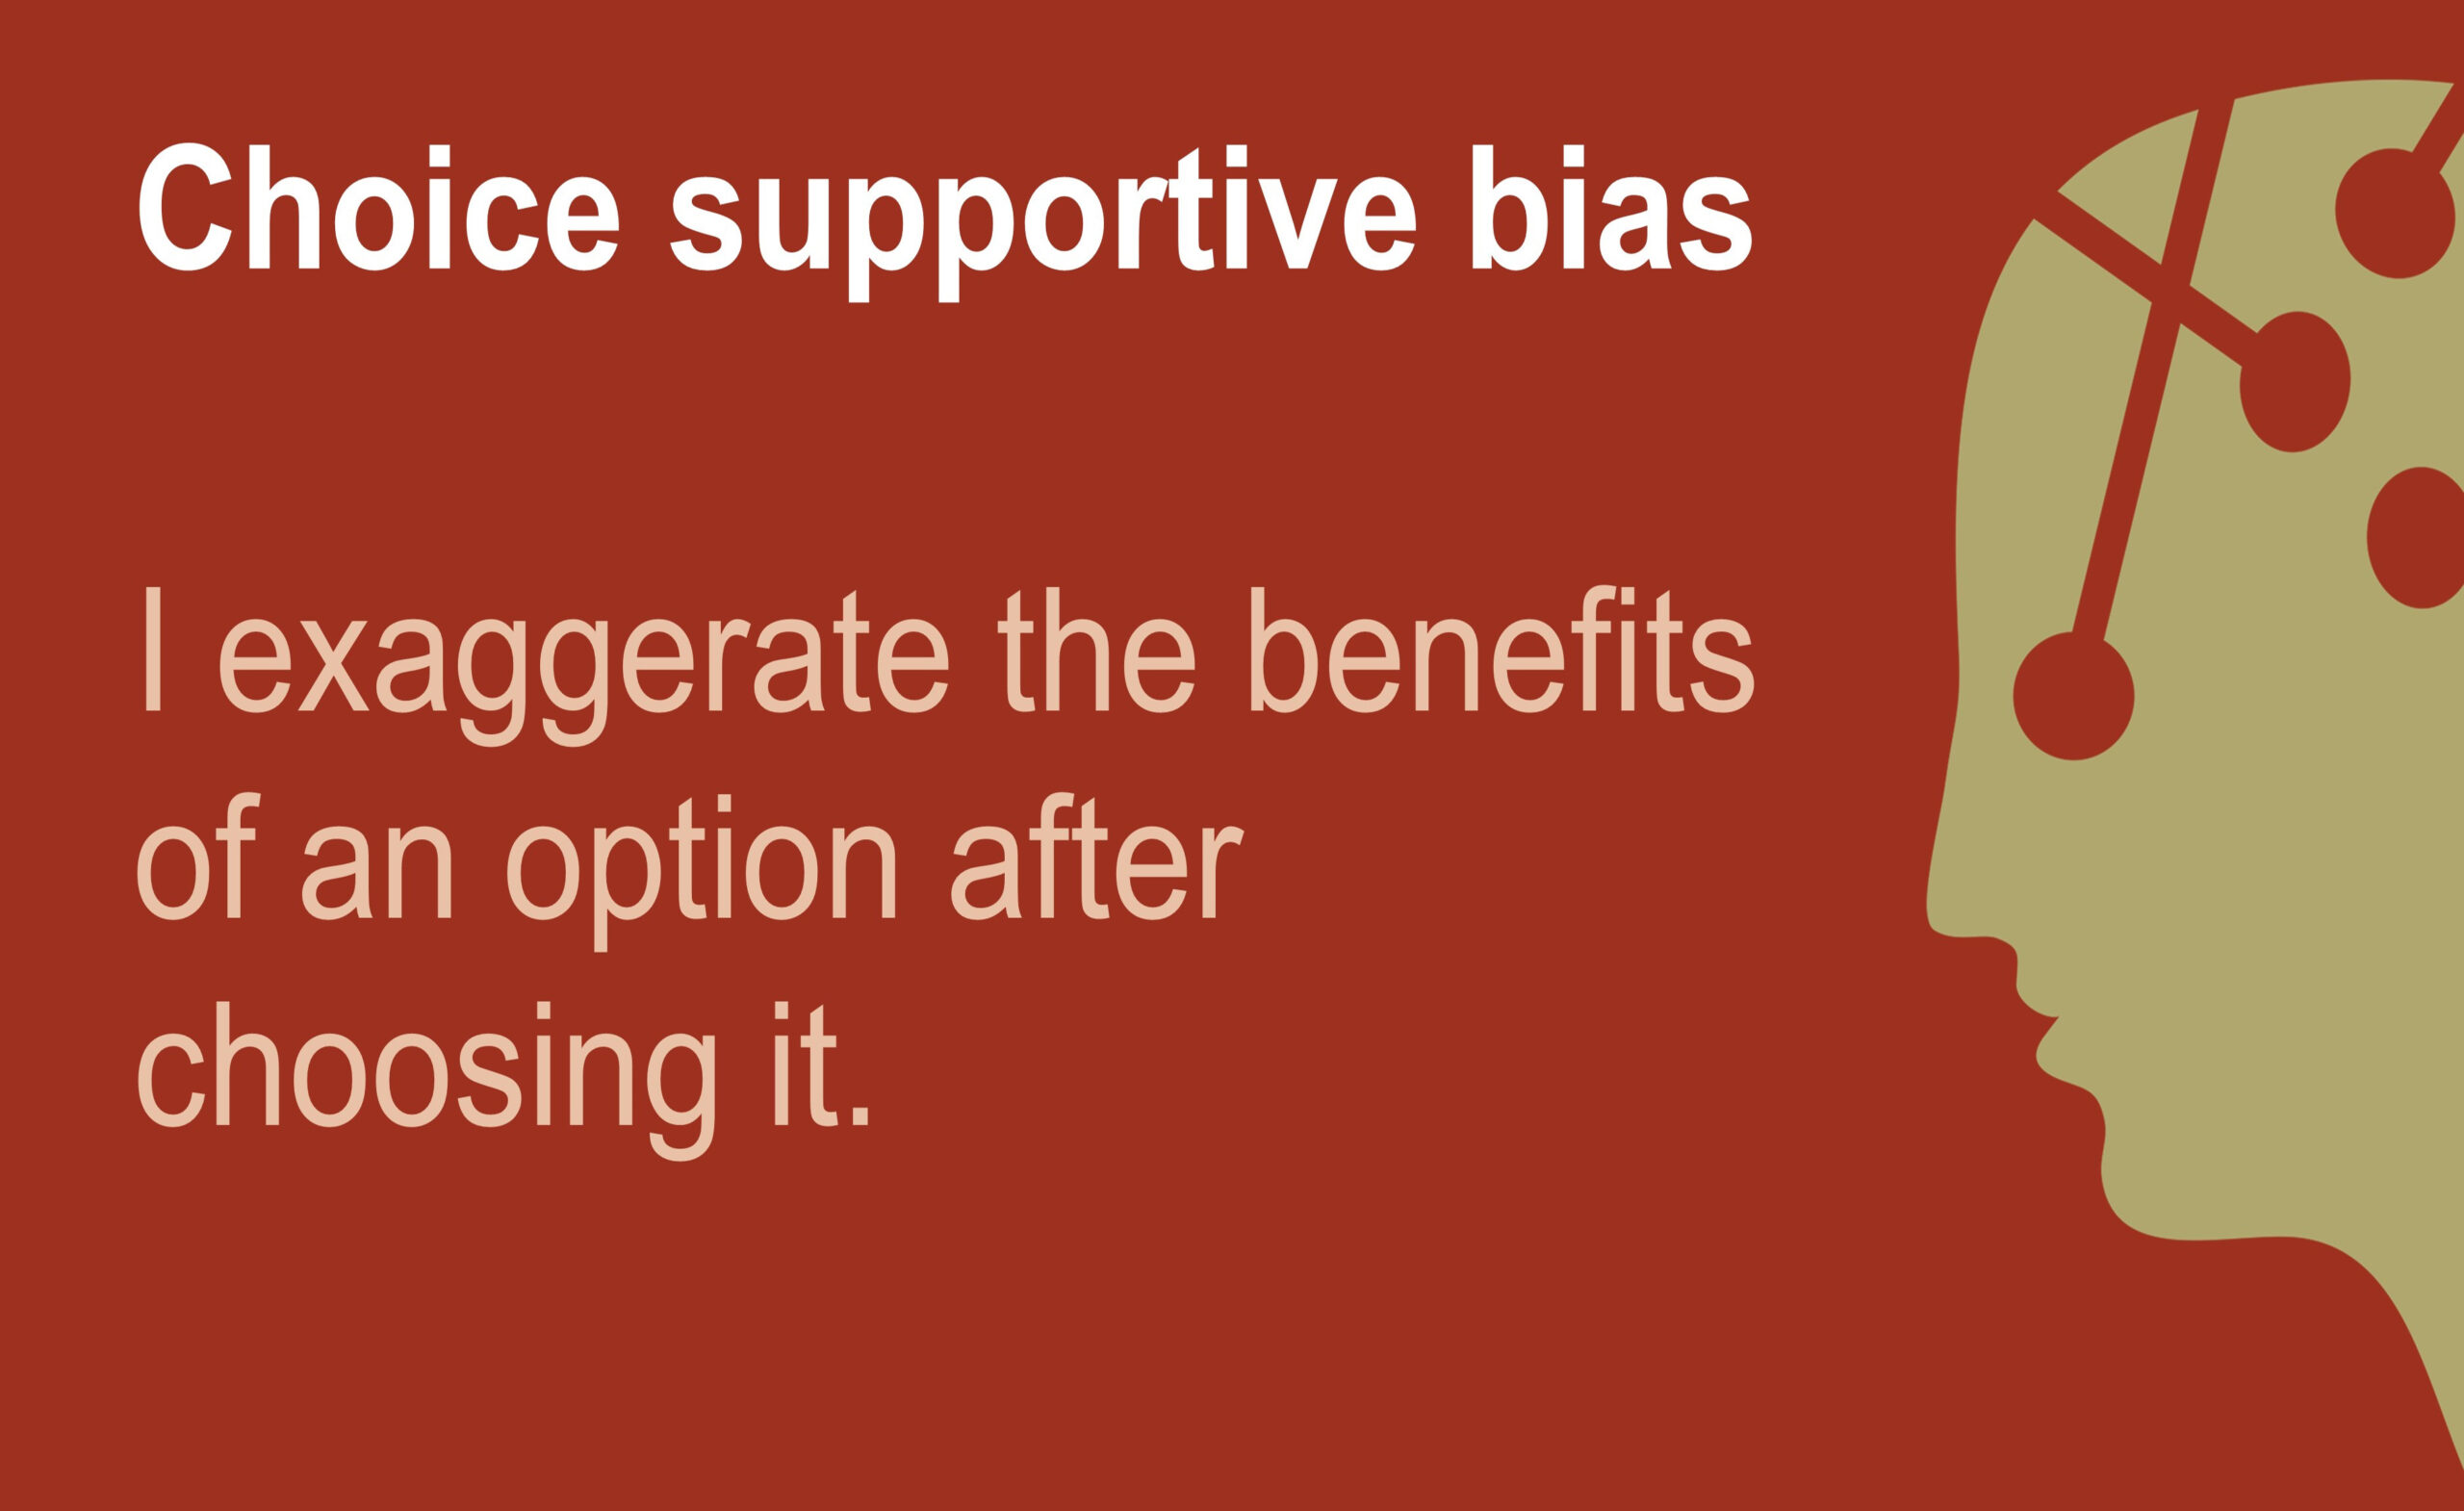 Choice-Supportive Bias illustrations